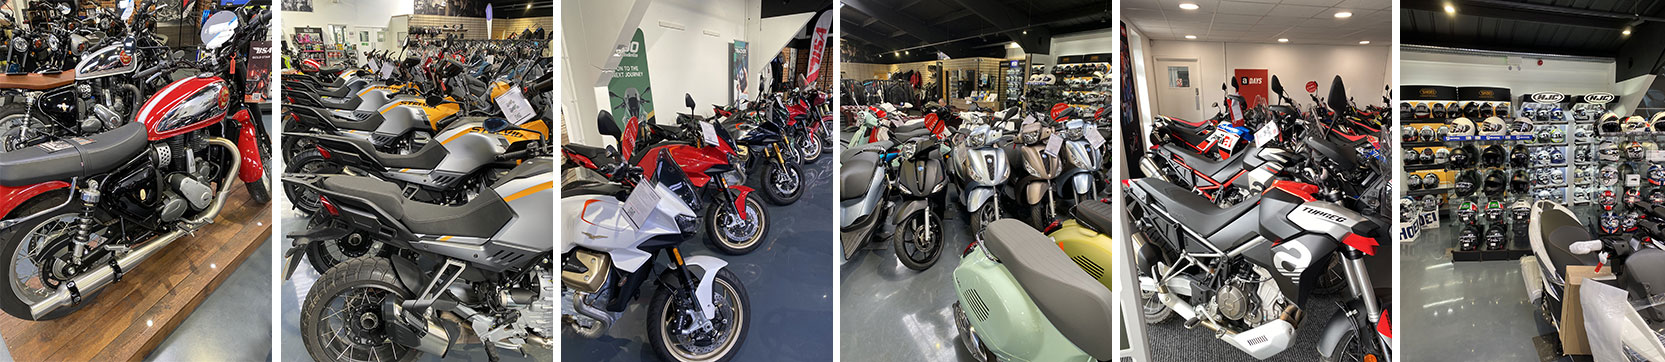 Inside the Motorcycles Showroom at Dearden